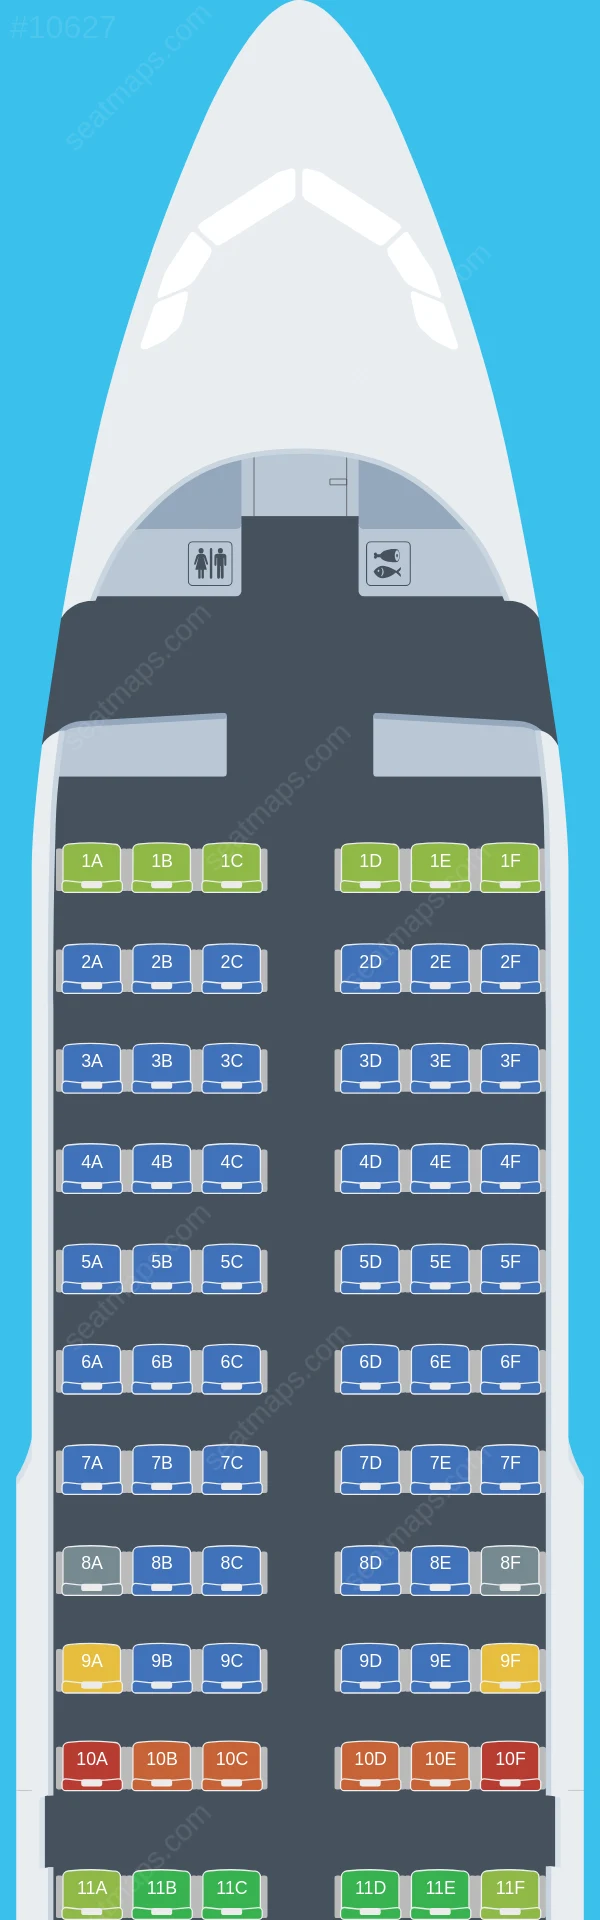 HiSky Airbus A319-100 seatmap preview